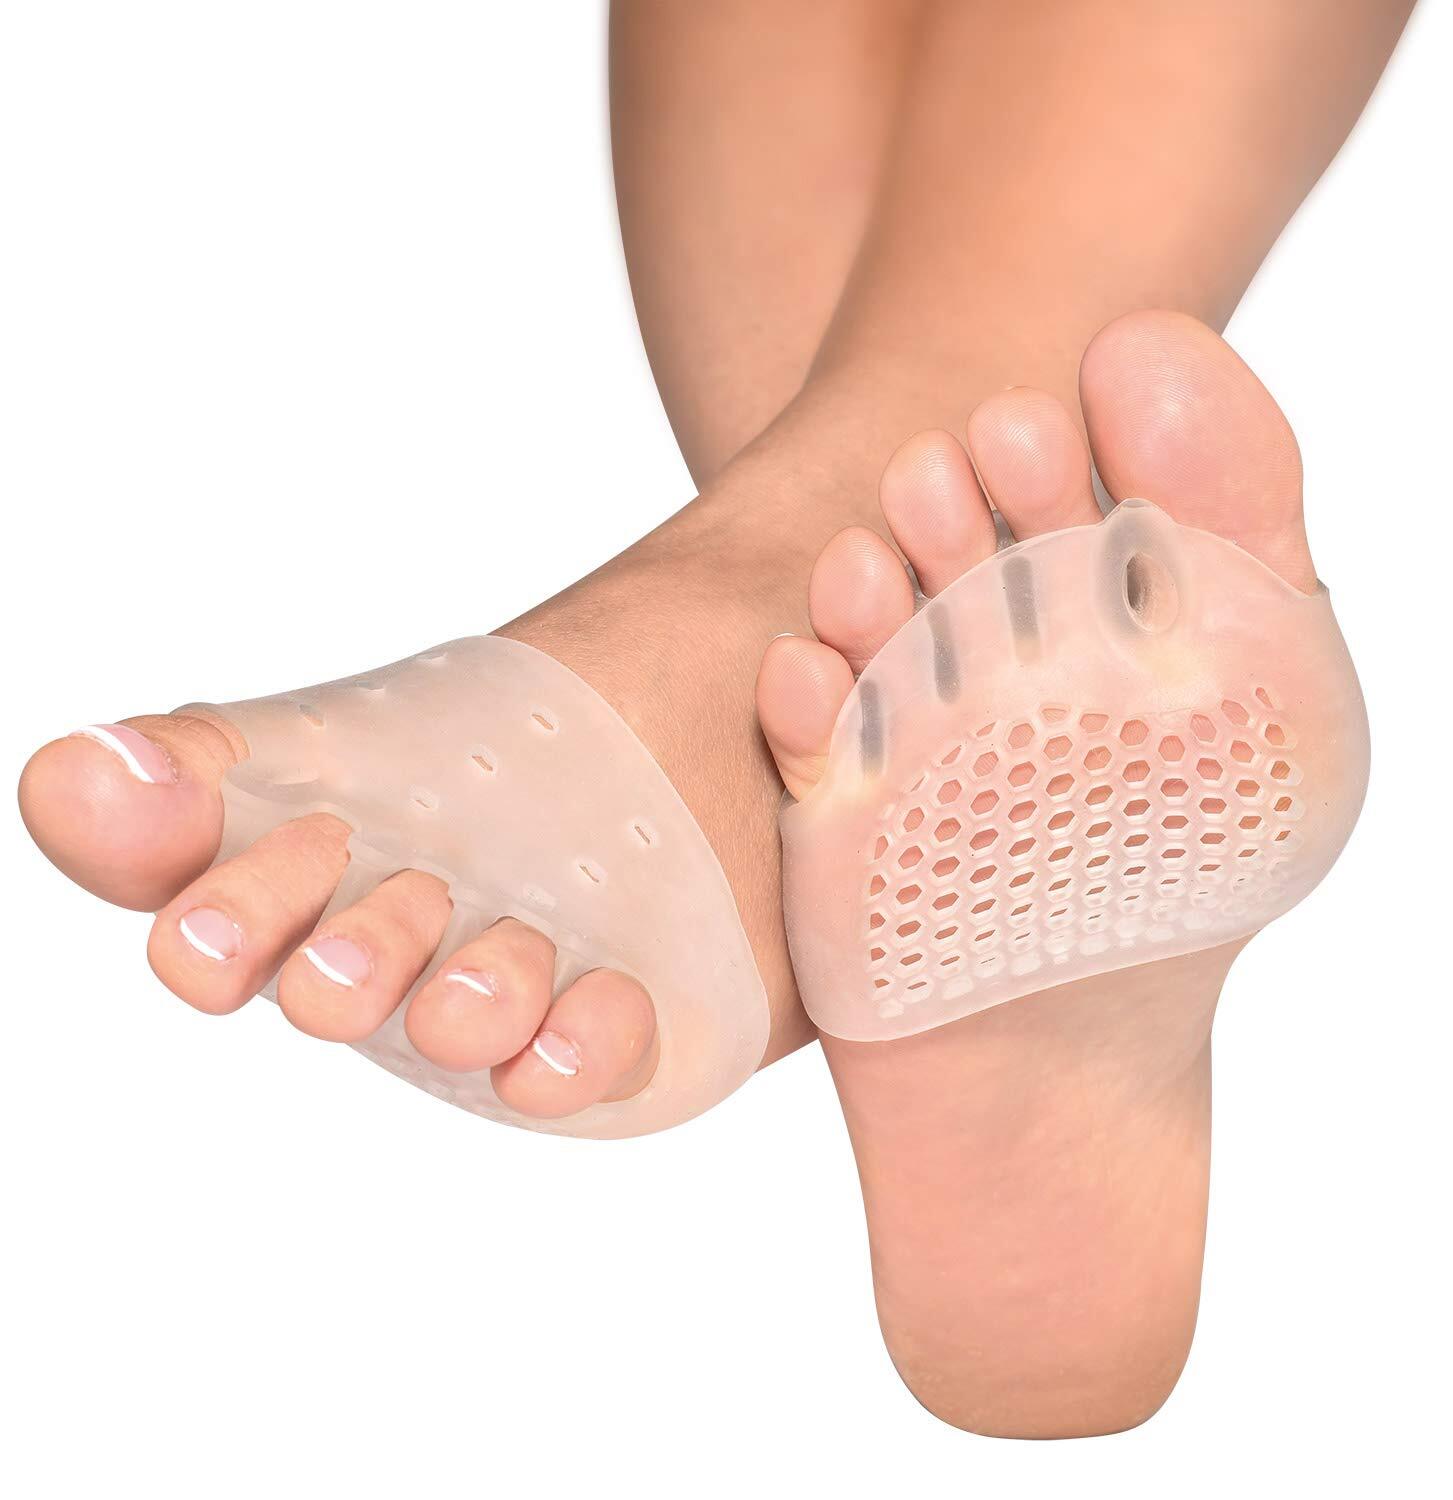 silicone foot pads